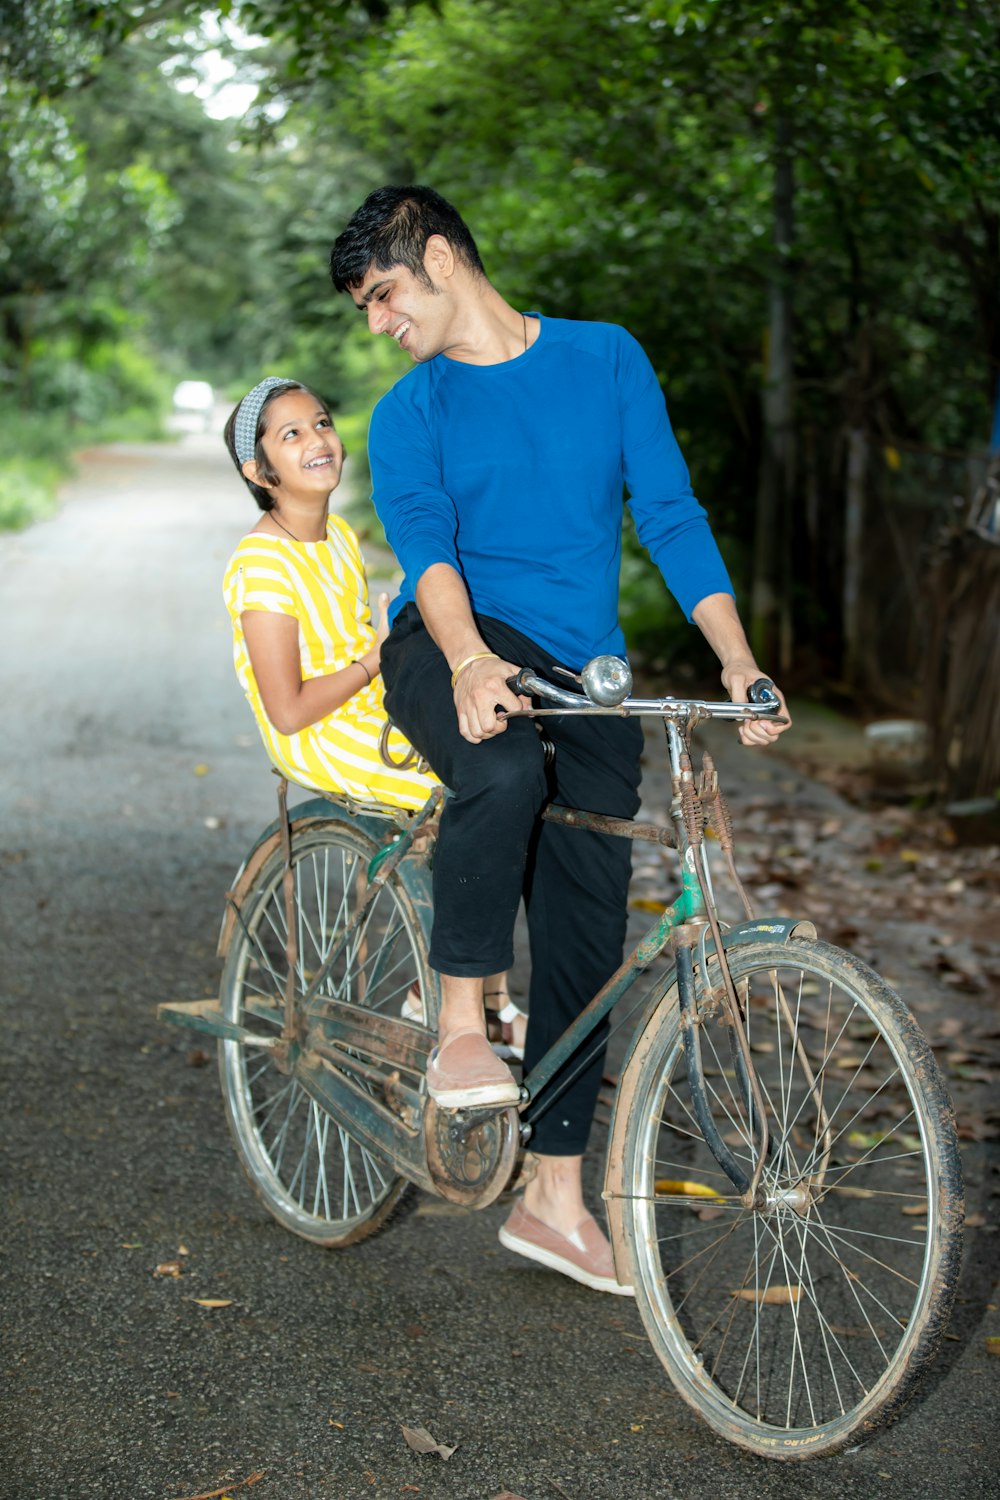 a man and a woman riding a bicycle together